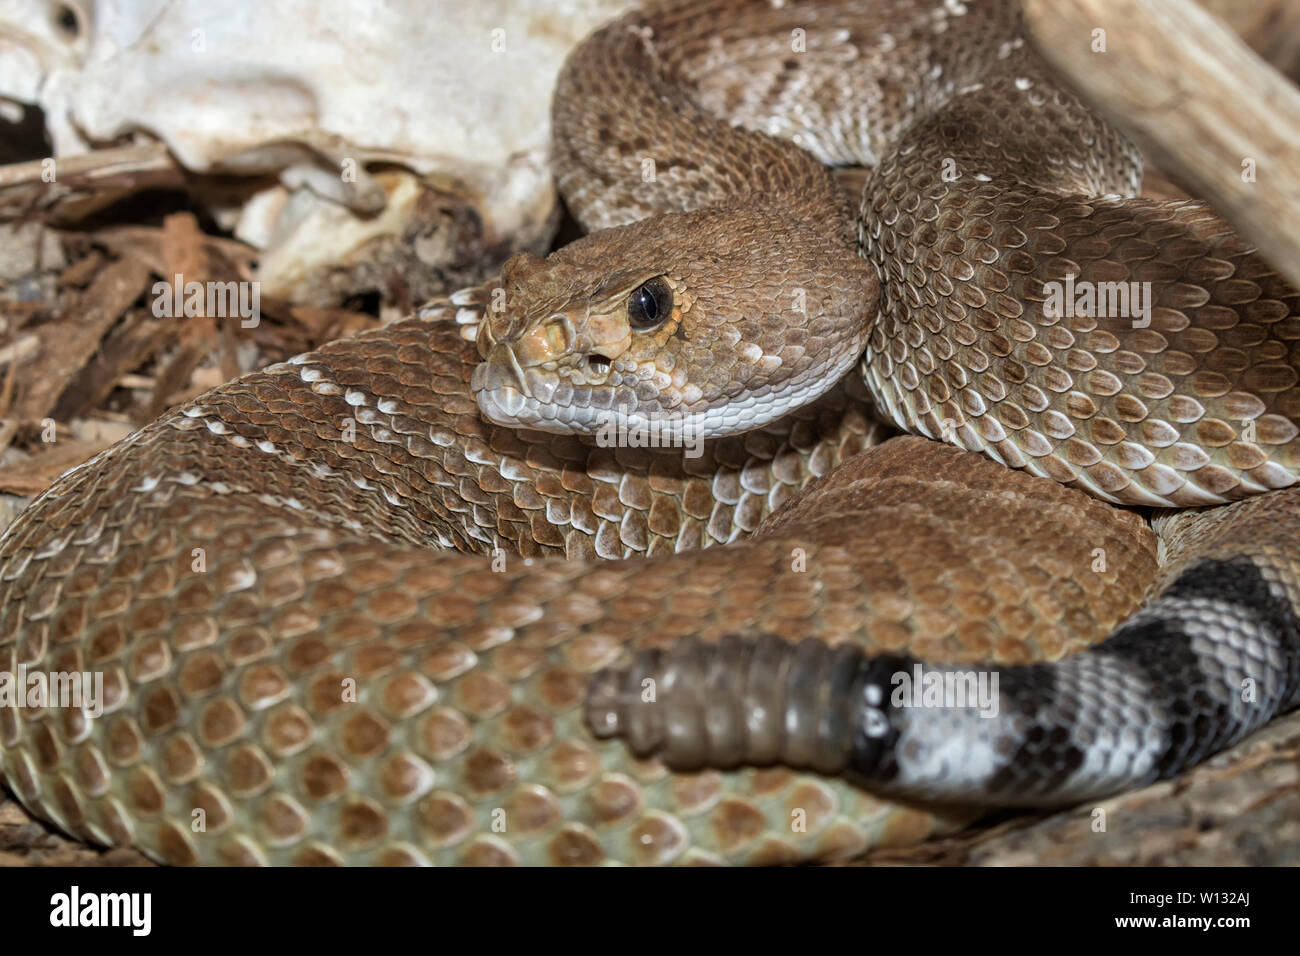 Red diamond rattlesnake (Crotalus ruber) with its rattle Stock Photo